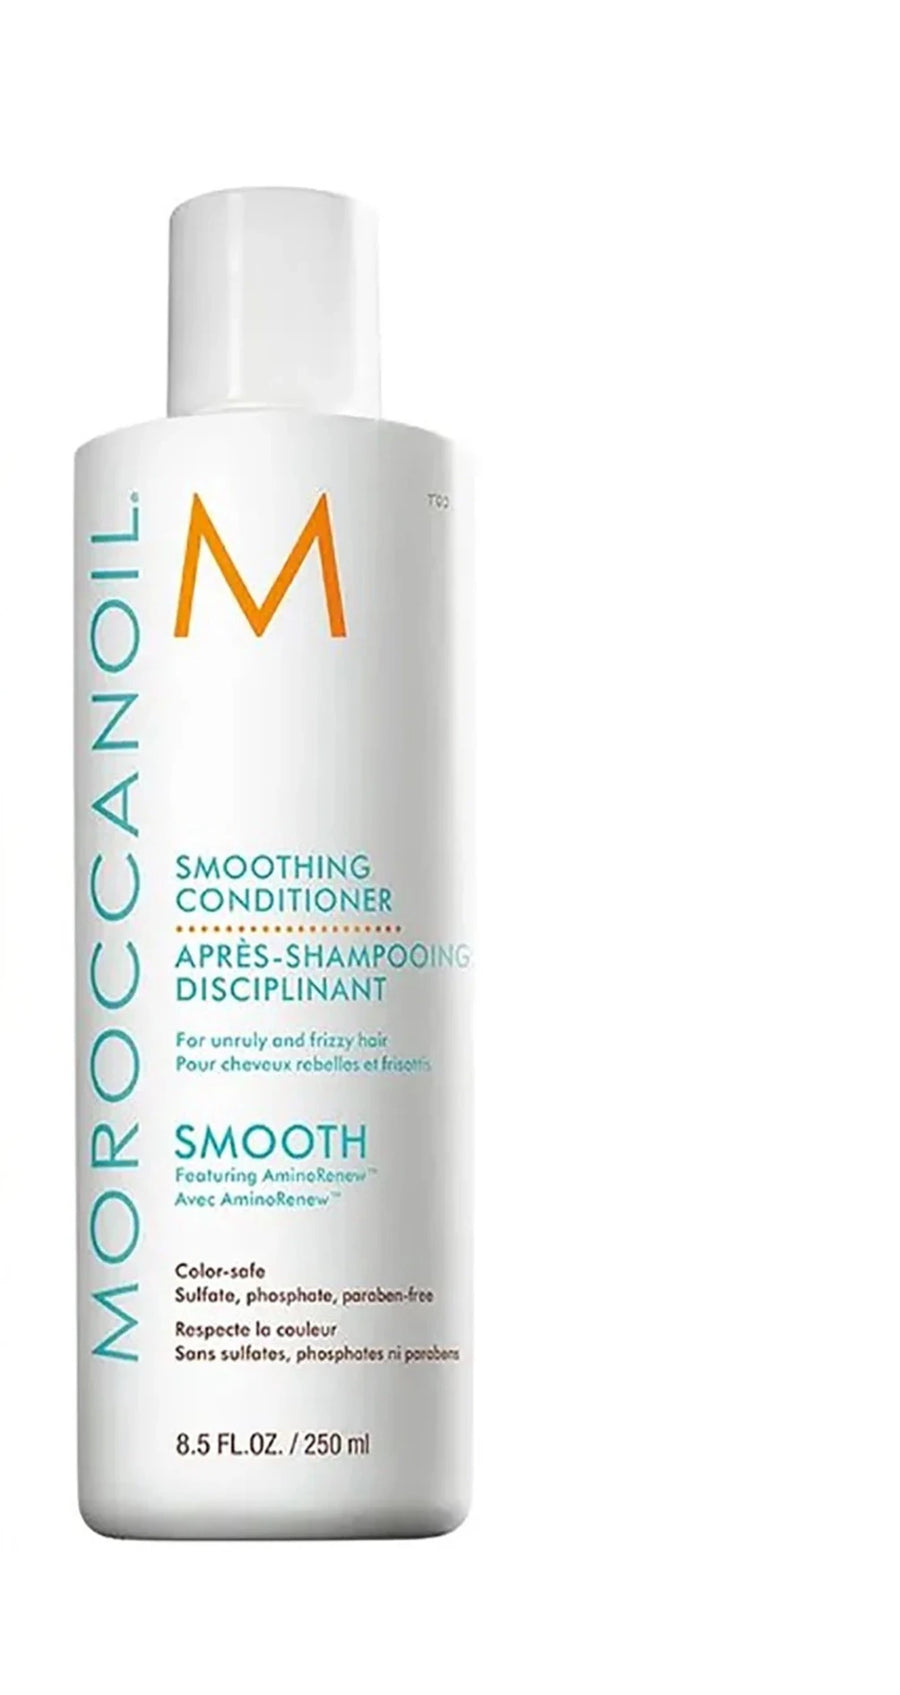 Moroccanoil Smoothing Conditioner image of 8.5 oz bottle